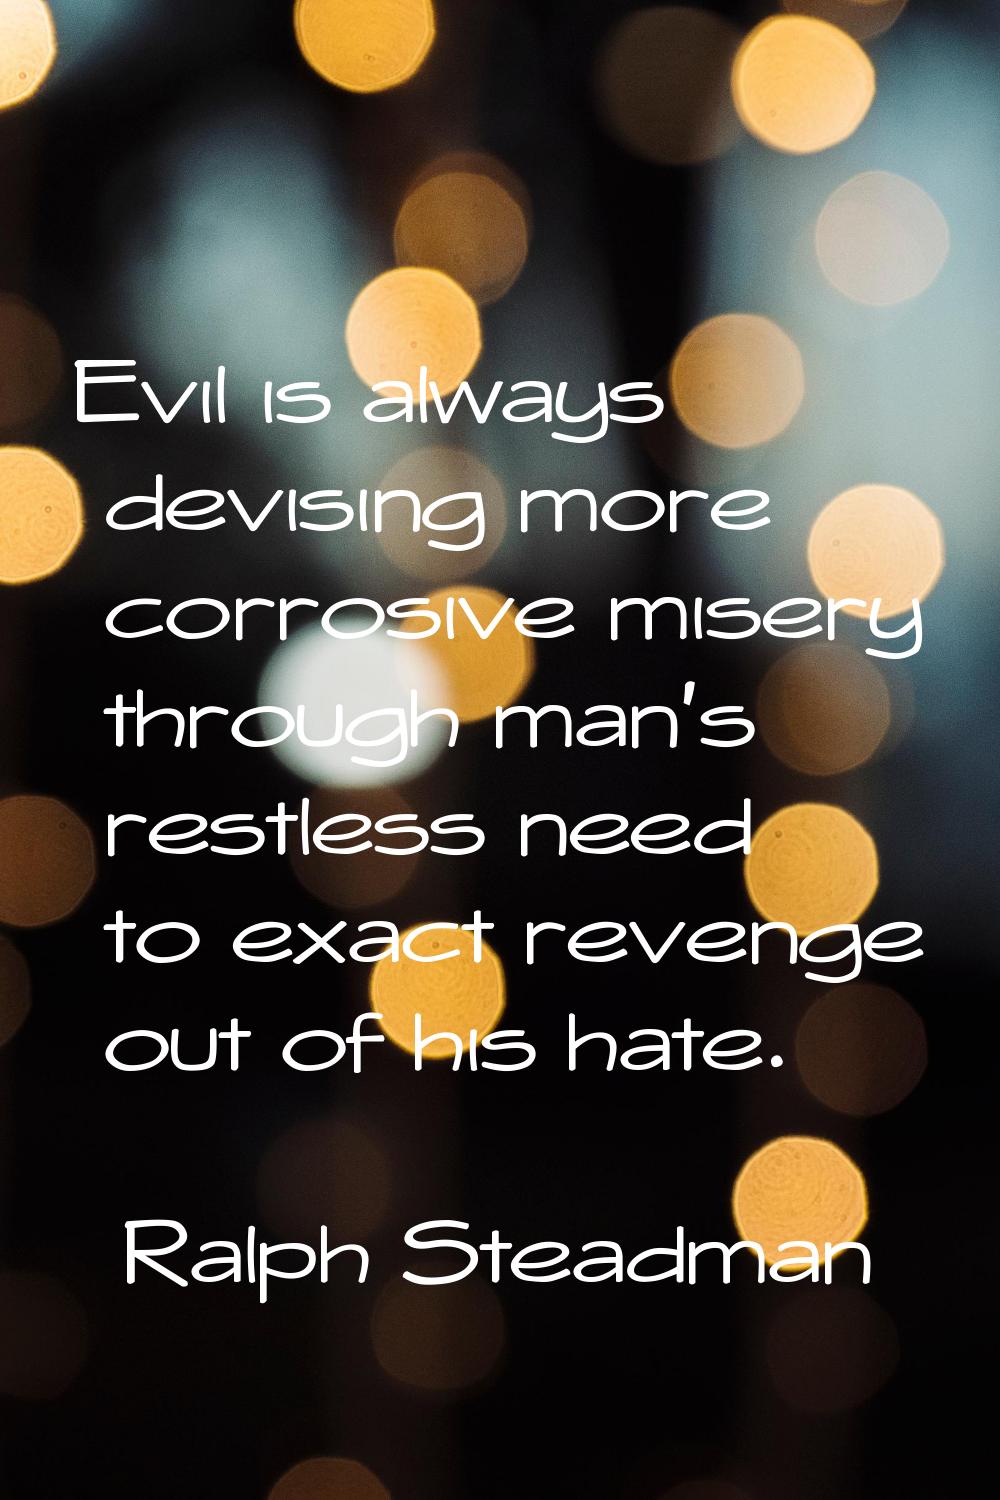 Evil is always devising more corrosive misery through man's restless need to exact revenge out of h